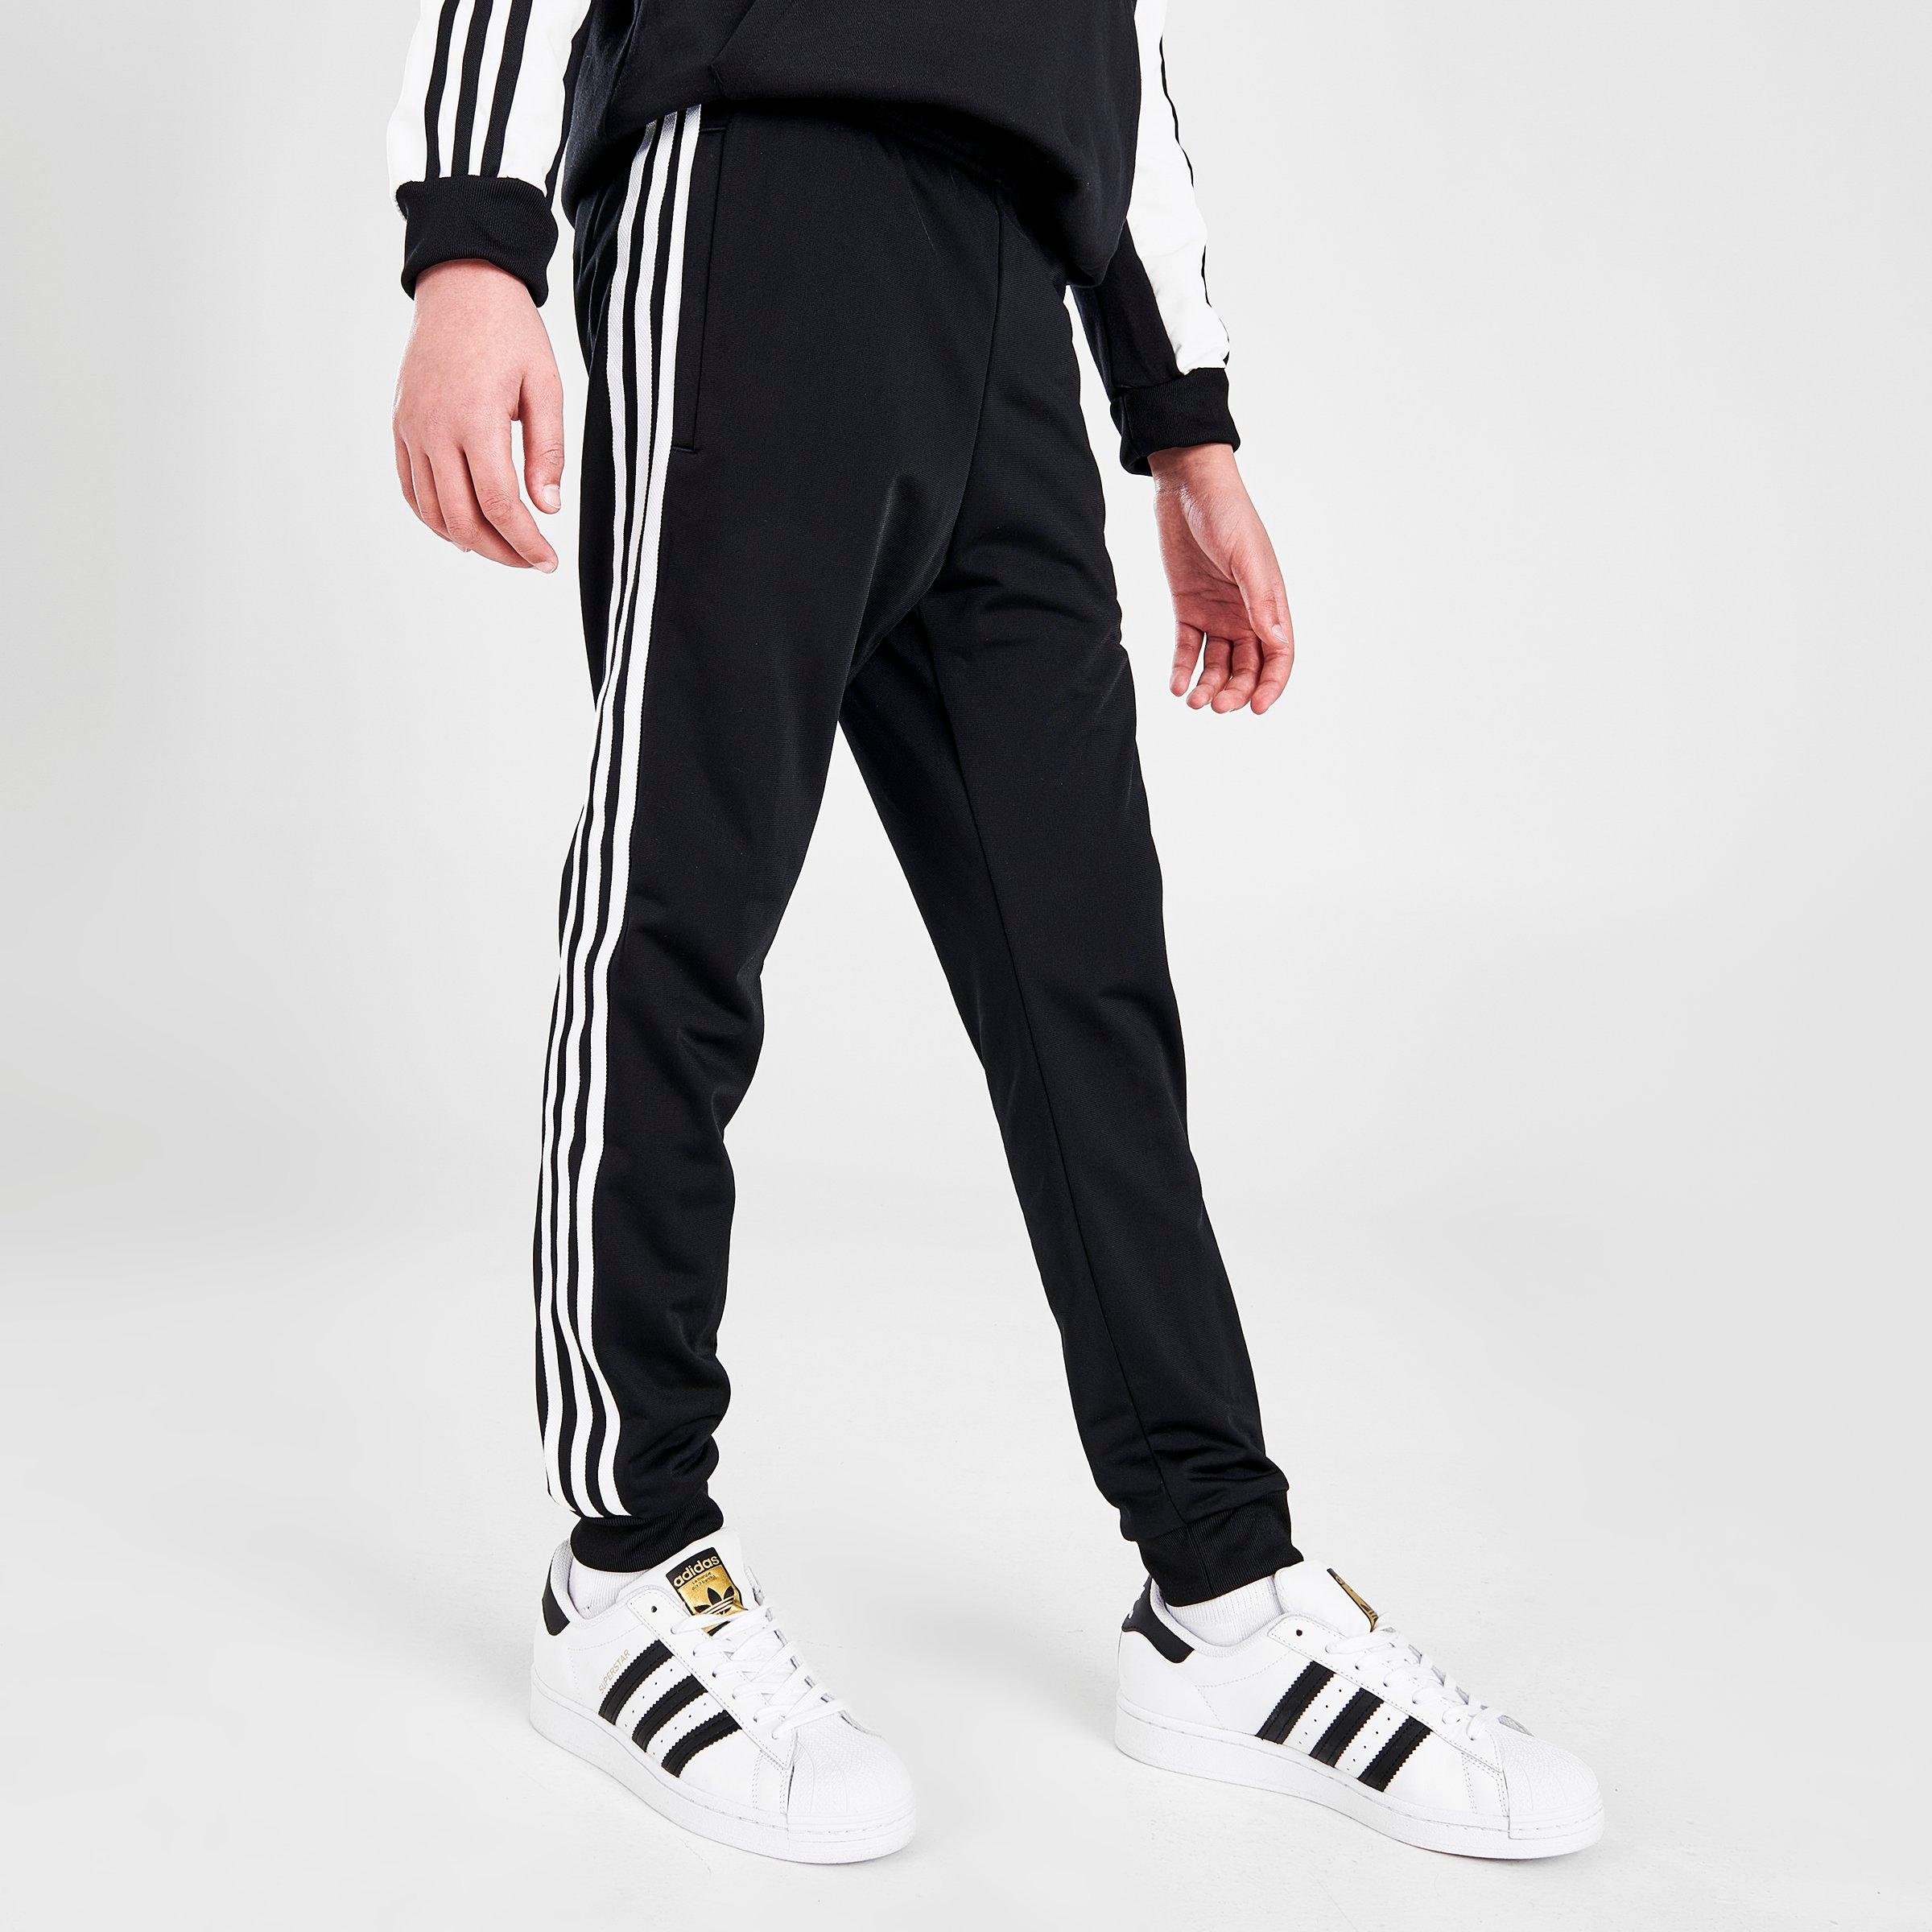 adidas pants with line in the back